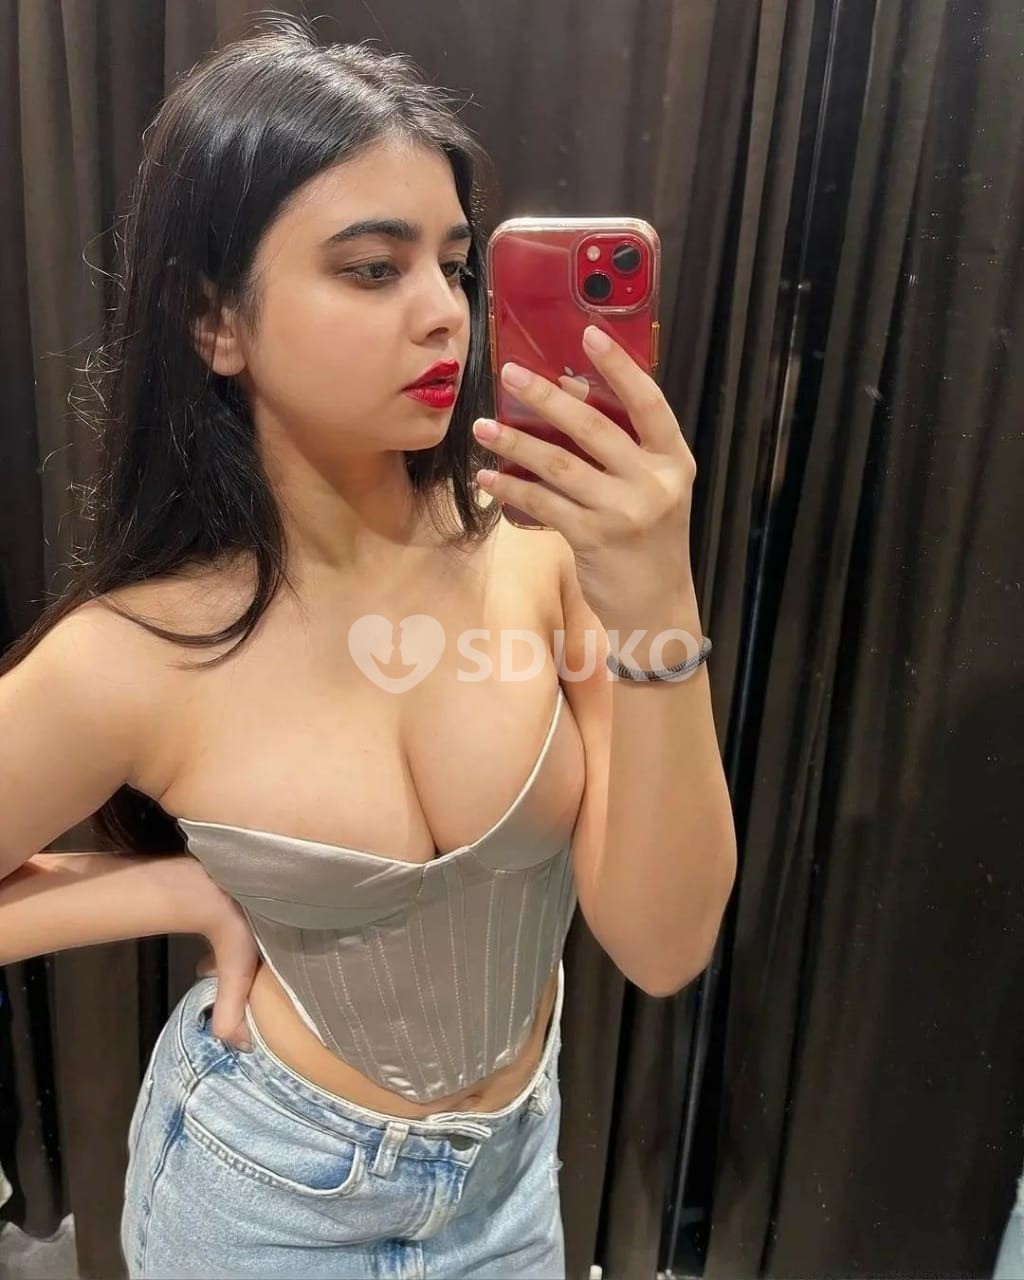 AMRITSAR &(VIP TODAY LOW PRICE ESCORT 🥰SERVICE 100% SAFE AND SECURE ANYTIME CALL ME 24 X 7 SERVICE AVAILABLE 100% SAF